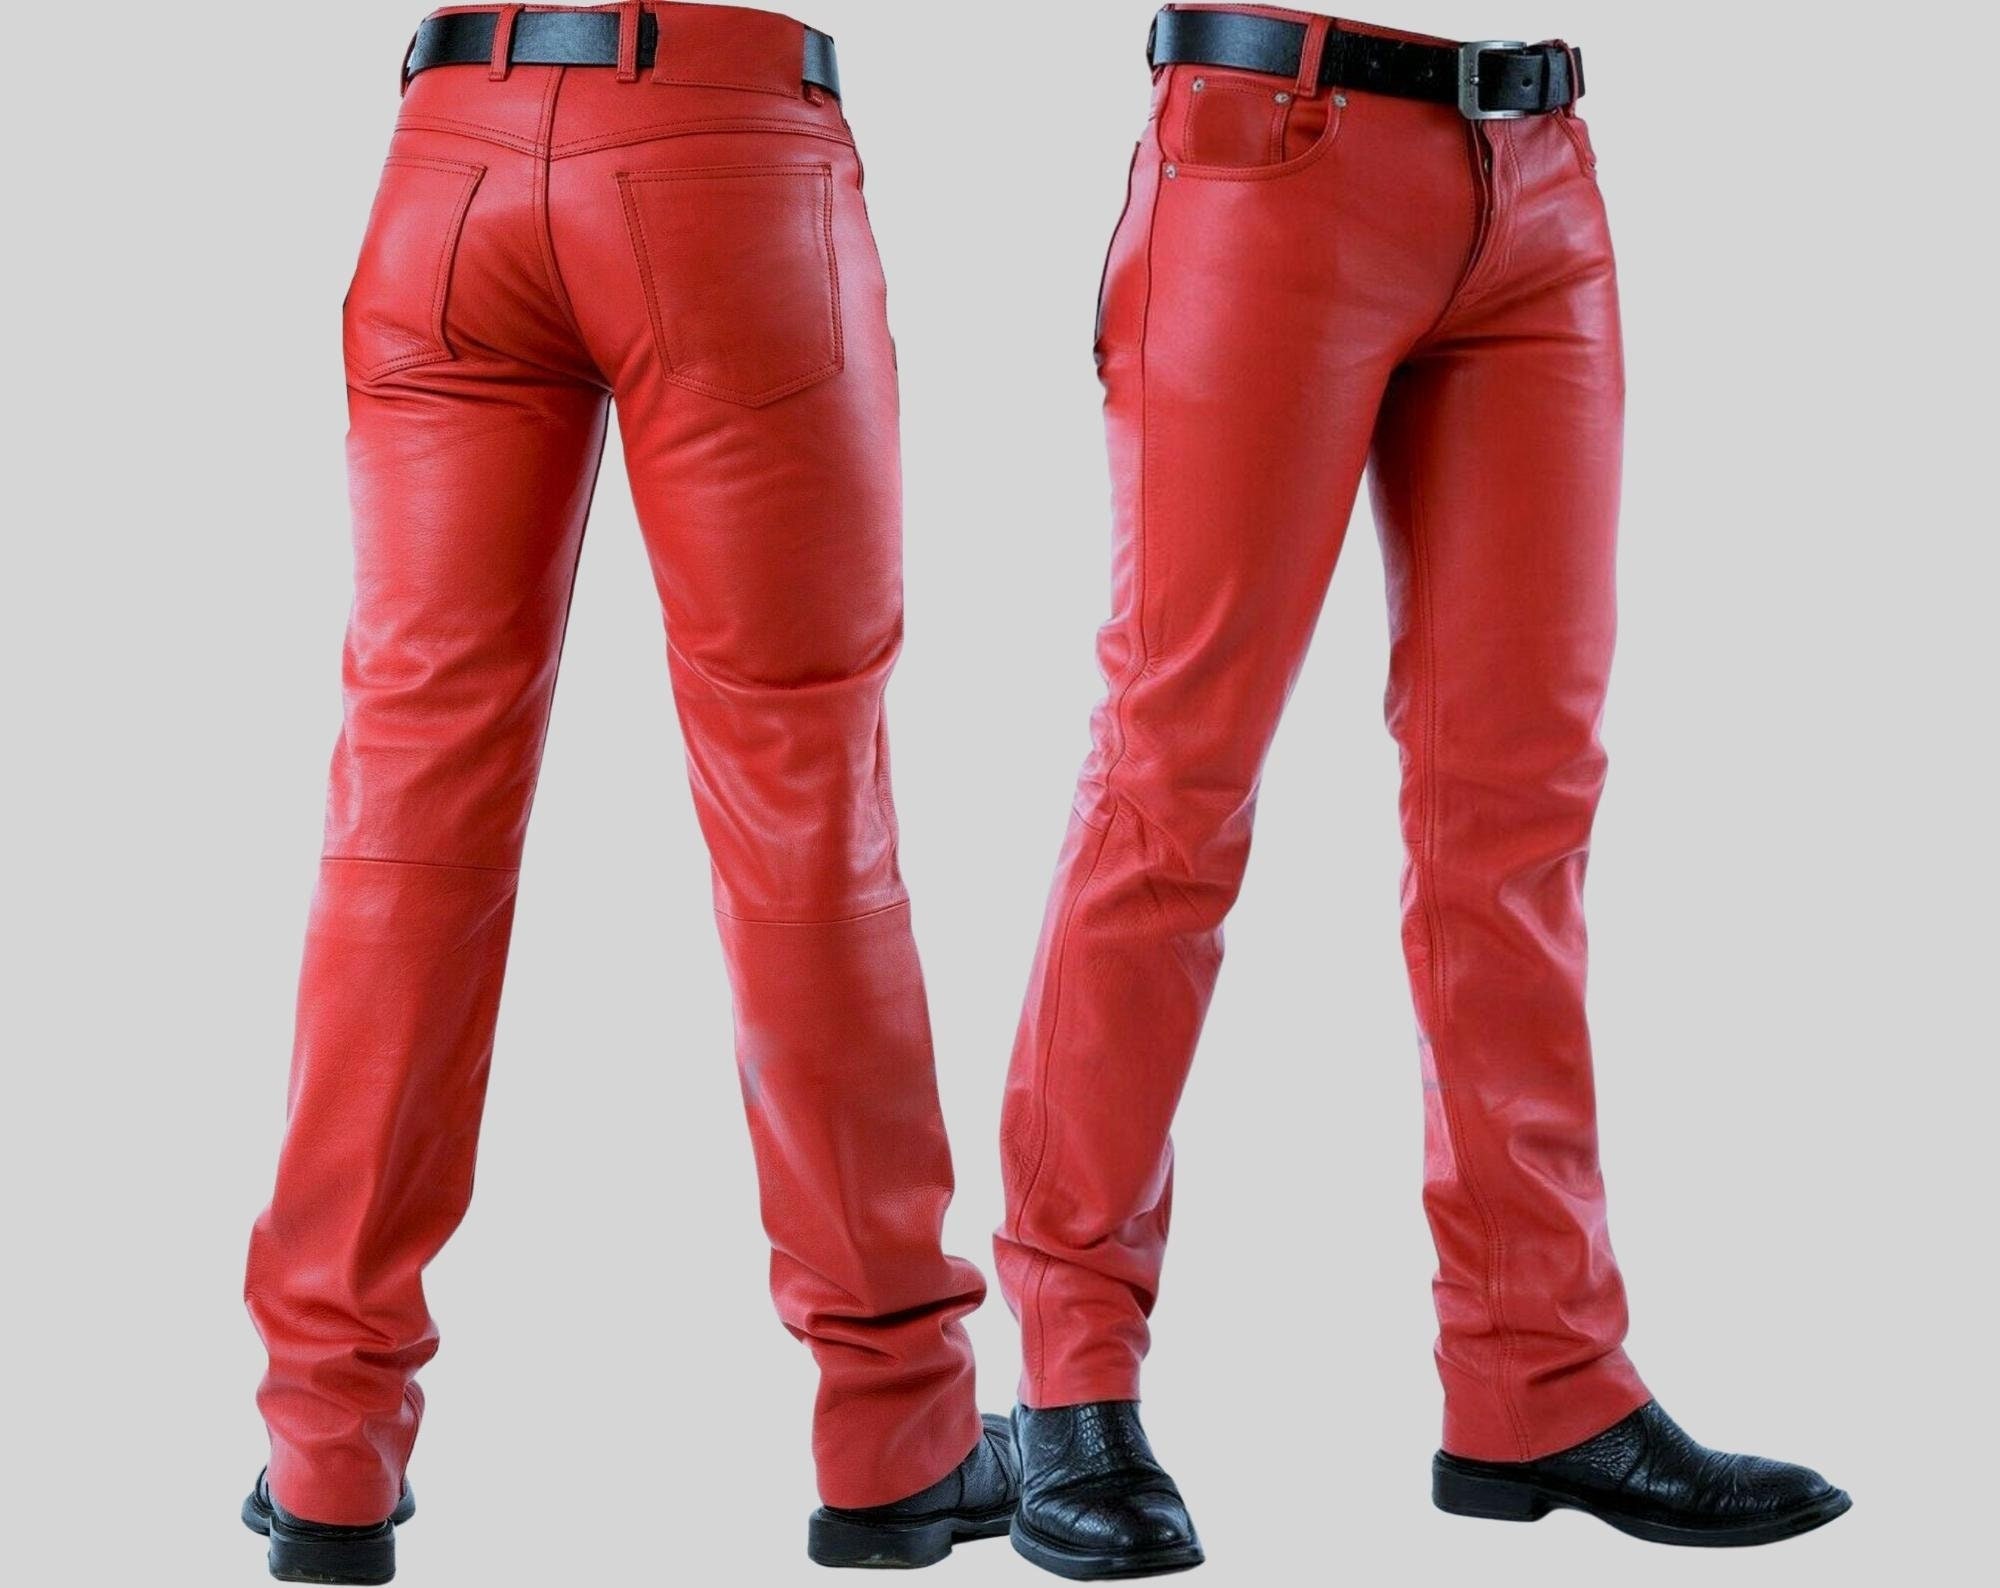 Share more than 83 custom leather pants latest